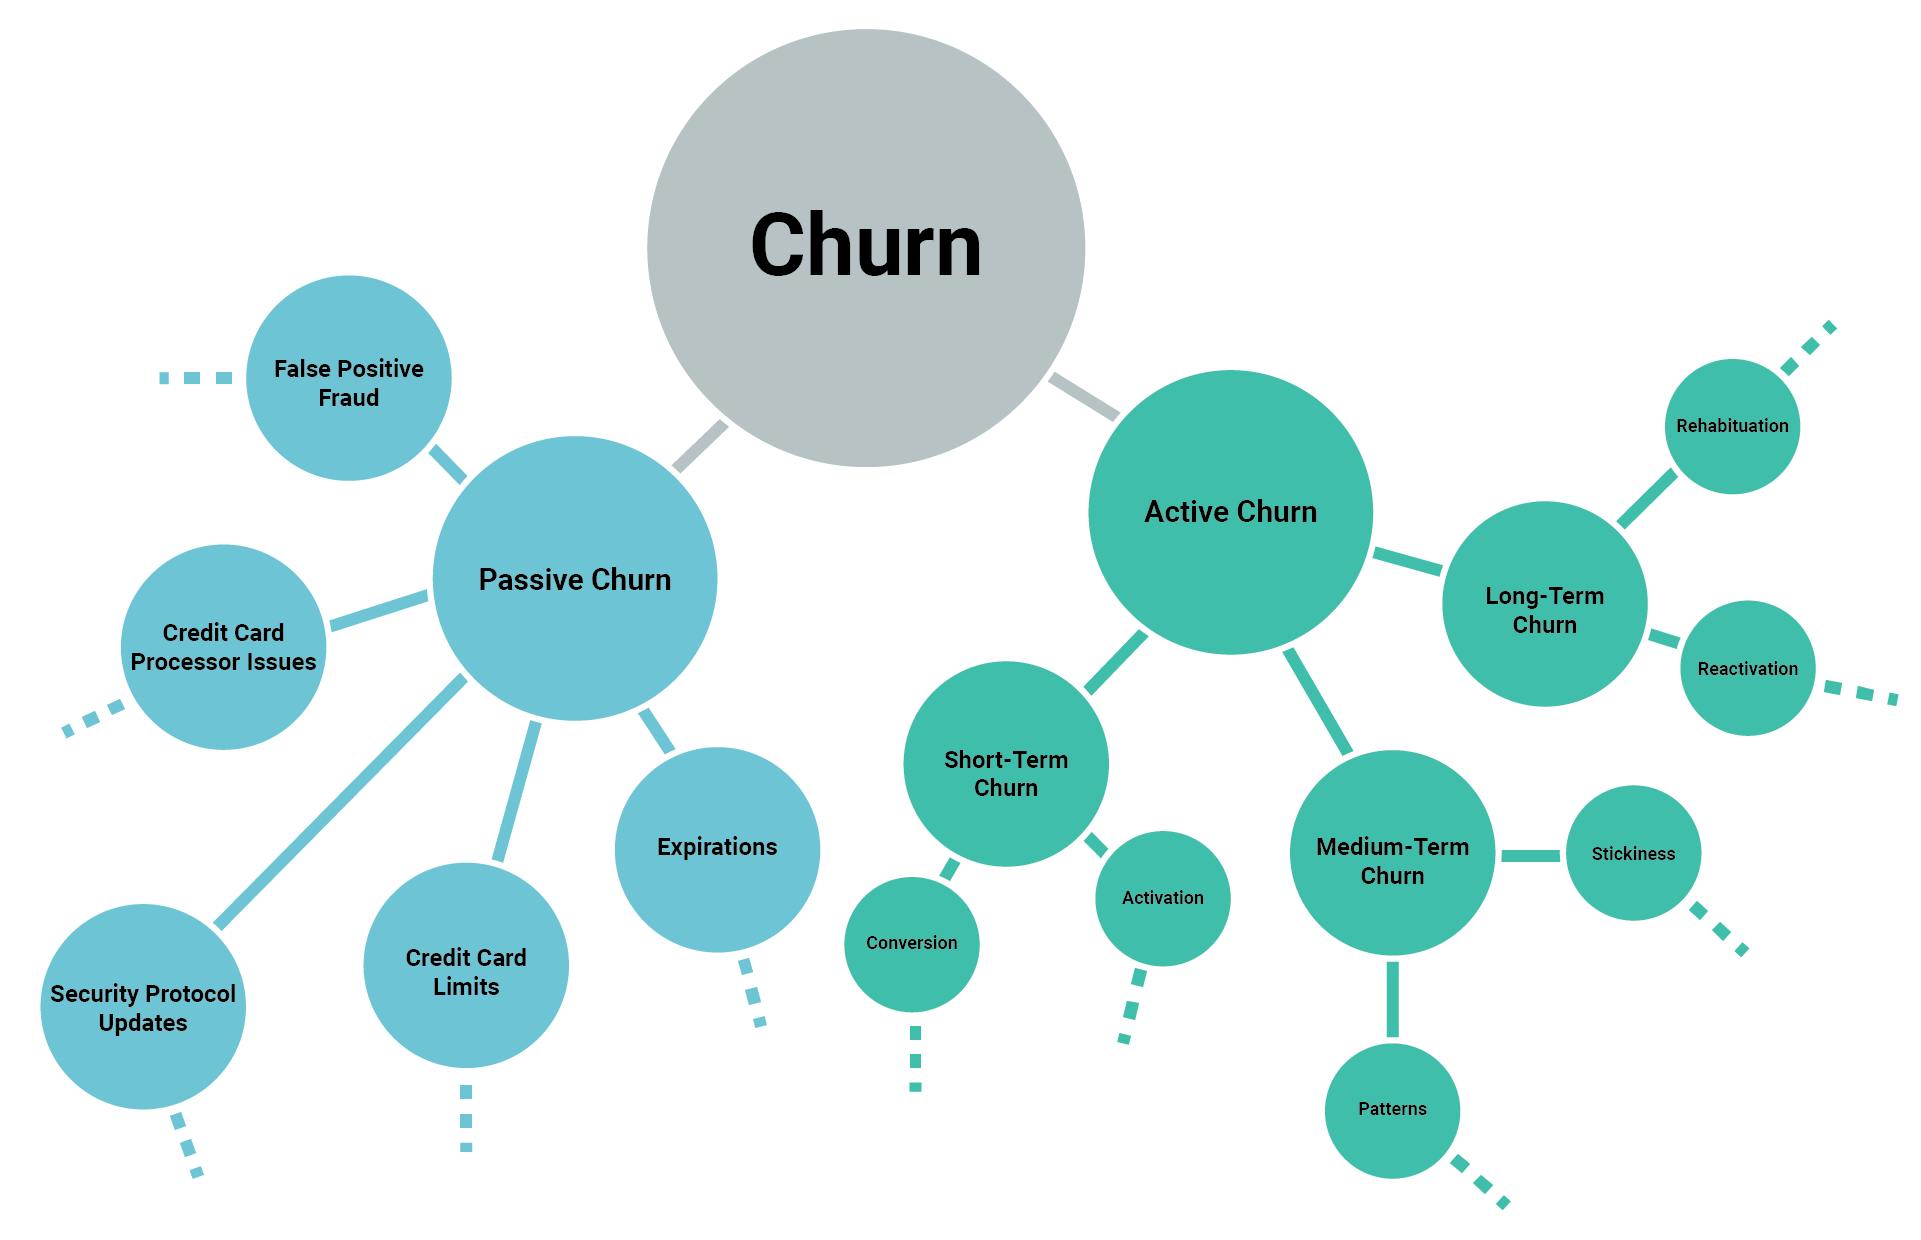 Churn is split into active and passive churn, with different subcategories in each